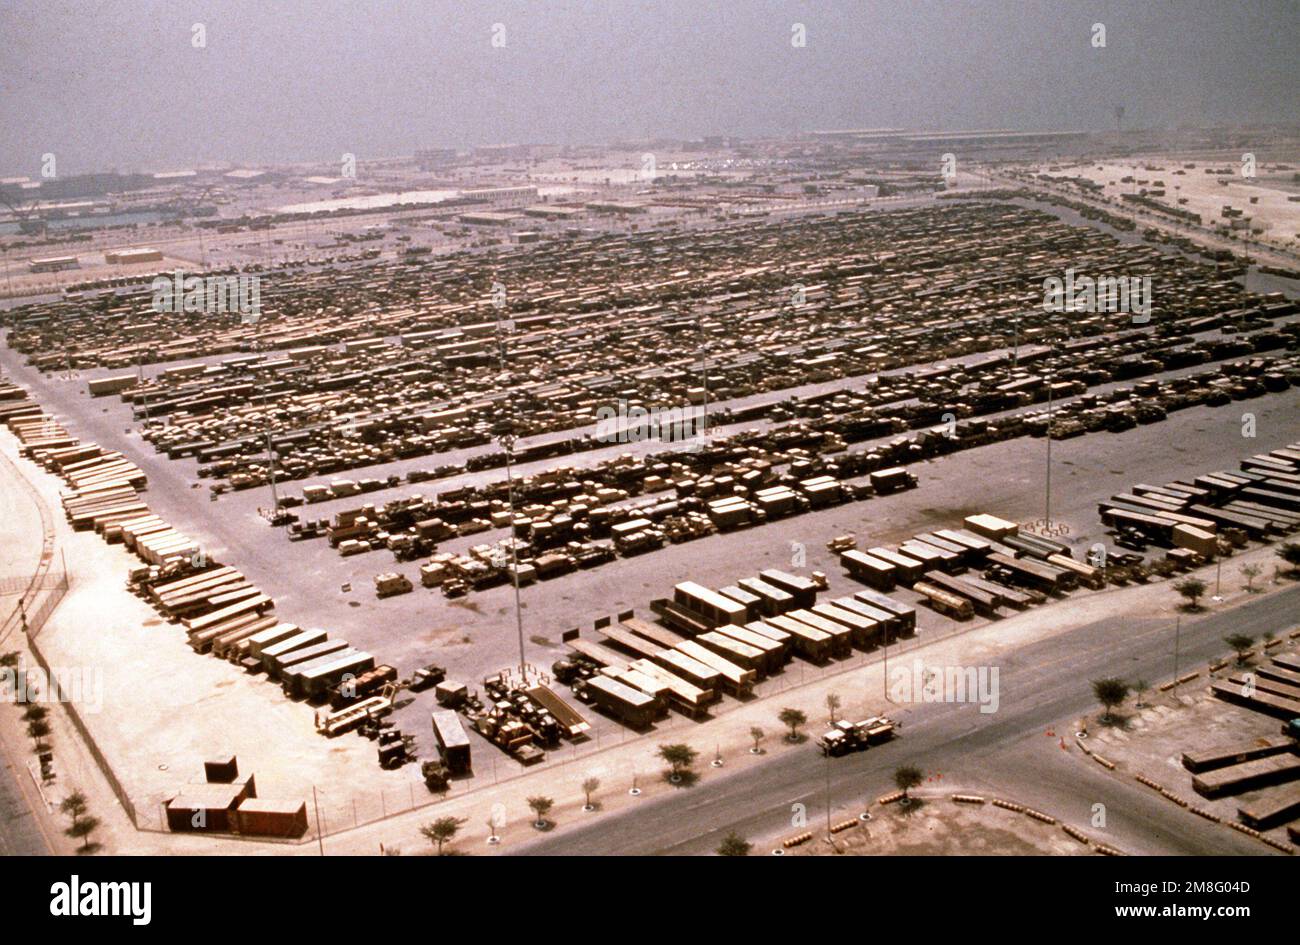 Military vehicles line a holding area near the port of Dammam in preparation for transport back to the United States in the aftermath of Operations Desert Shield/Desert Storm. Subject Operation/Series: DESERT SHIELD DESERT STORM Country: Saudi Arabia (SAU) Stock Photo